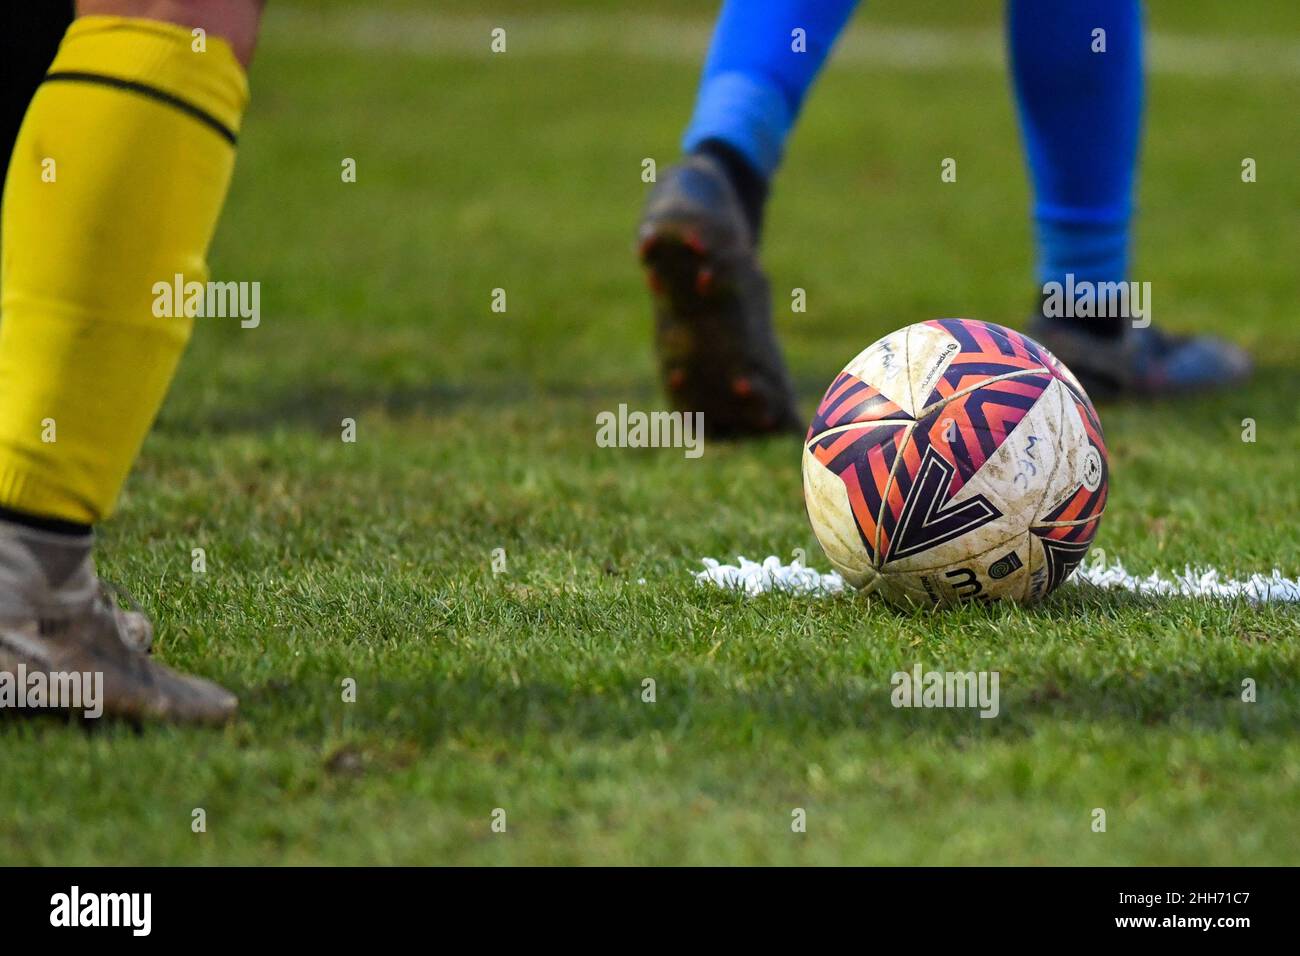 Kings Langley, UK. 23rd January, 2022. Kings Langley match ball during the FA womens Championship game between Watford and Blackburn Rovers - at The Orbital Fasteners Stadium - Kings Langley, England Kevin Hodgson /SPP Credit: SPP Sport Press Photo. /Alamy Live News Stock Photo